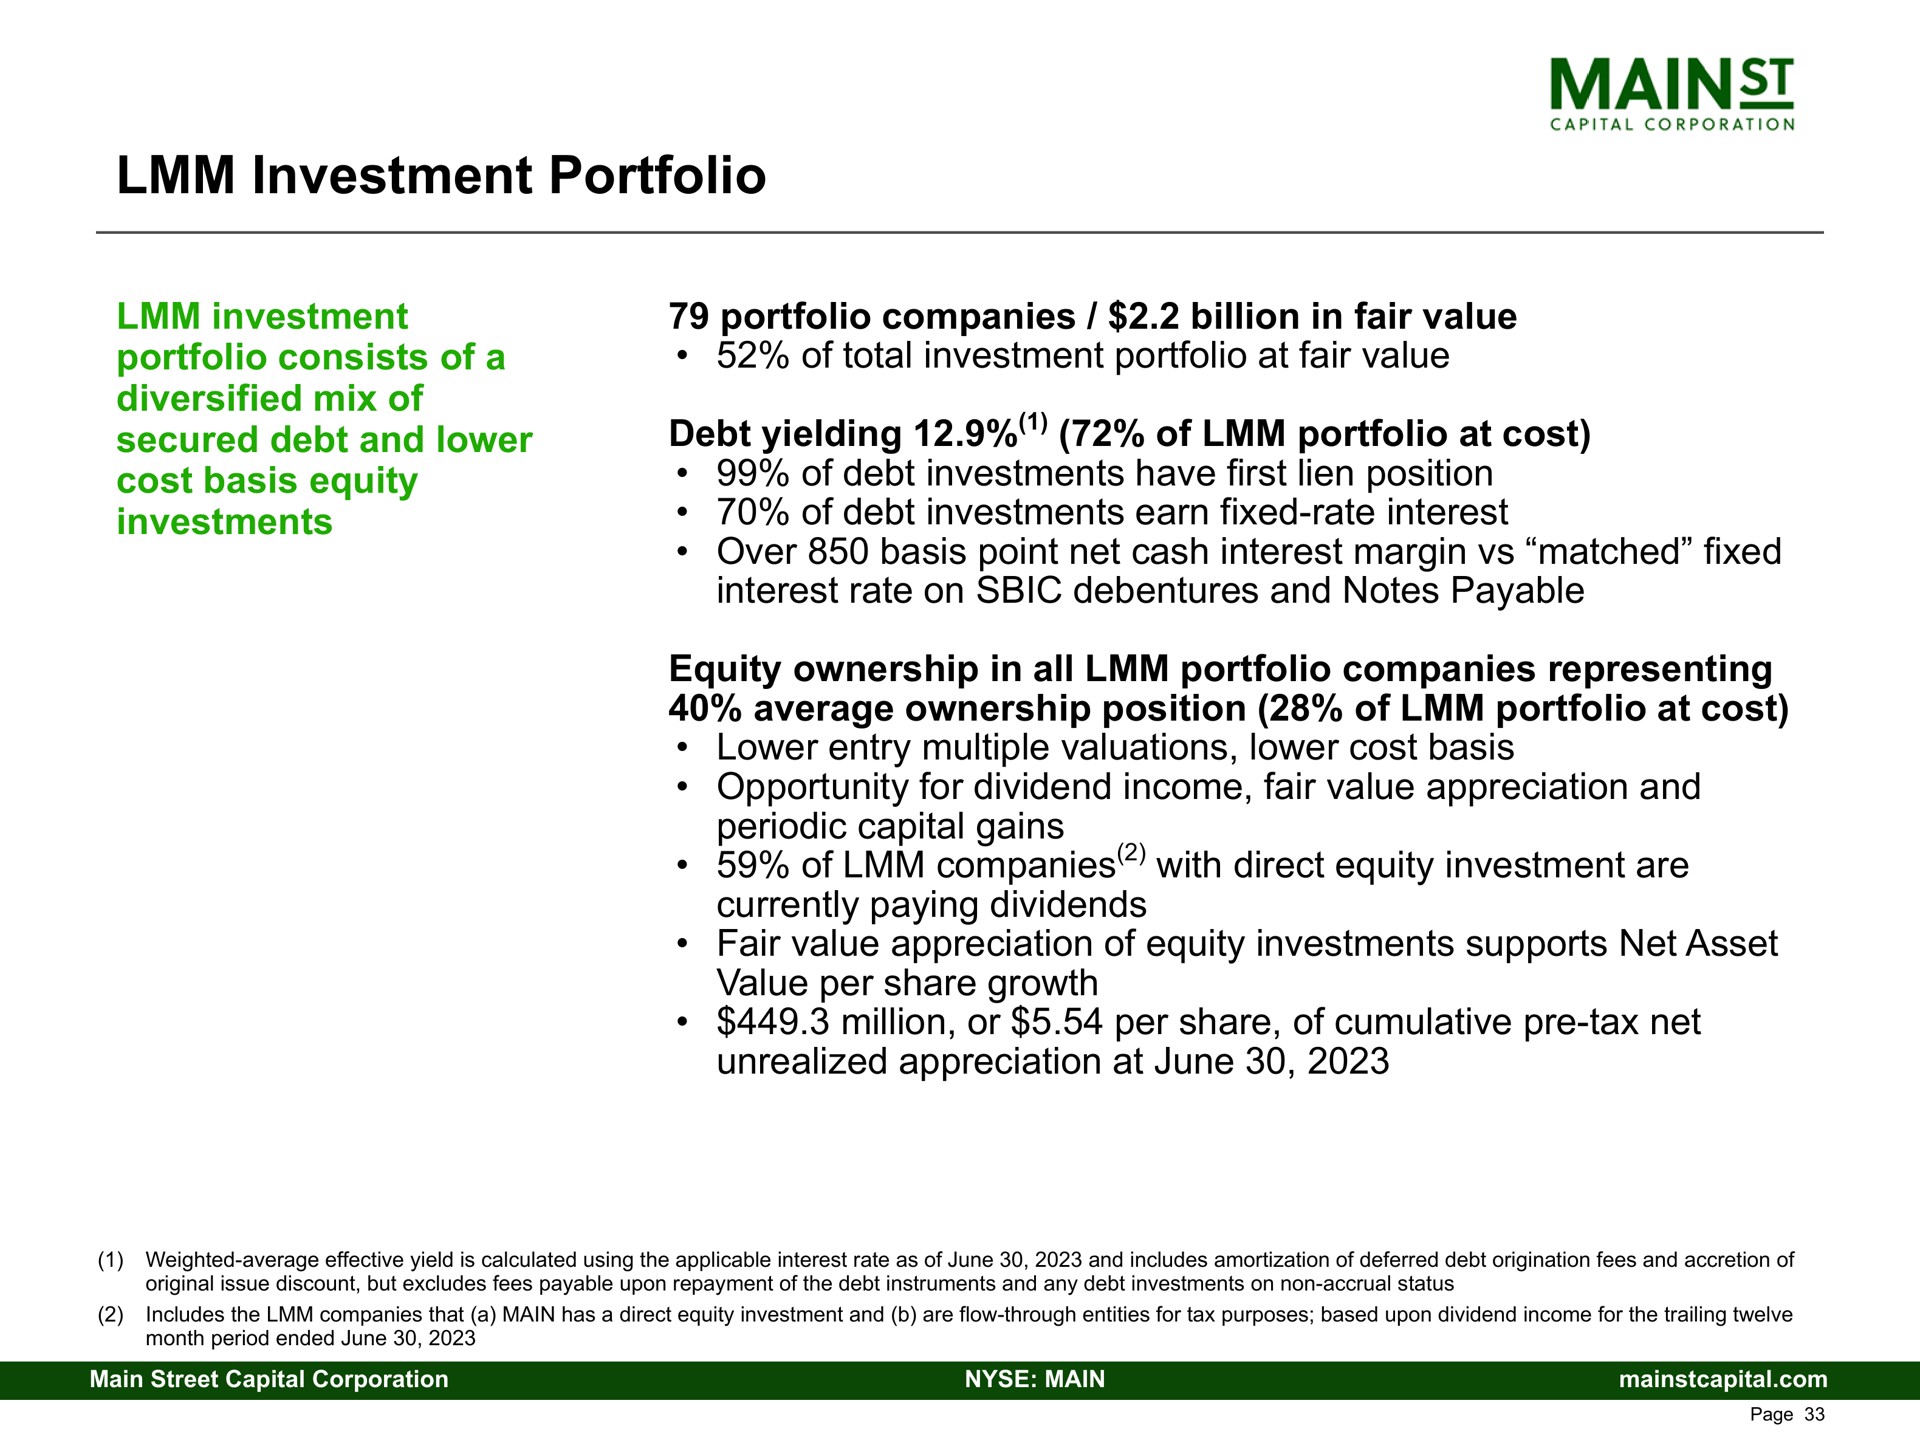 investment portfolio investment portfolio consists of a diversified mix of secured debt and lower cost basis equity investments portfolio companies billion in fair value of total investment portfolio at fair value debt yielding of portfolio at cost of debt investments have first lien position of debt investments earn fixed rate interest over basis point net cash interest margin matched fixed interest rate on debentures and notes payable equity ownership in all portfolio companies representing average ownership position of portfolio at cost lower entry multiple valuations lower cost basis opportunity for dividend income fair value appreciation and periodic capital gains of companies with direct equity investment are currently paying dividends fair value appreciation of equity investments supports net asset value per share growth million or per share of cumulative tax net unrealized appreciation at june mains | Main Street Capital